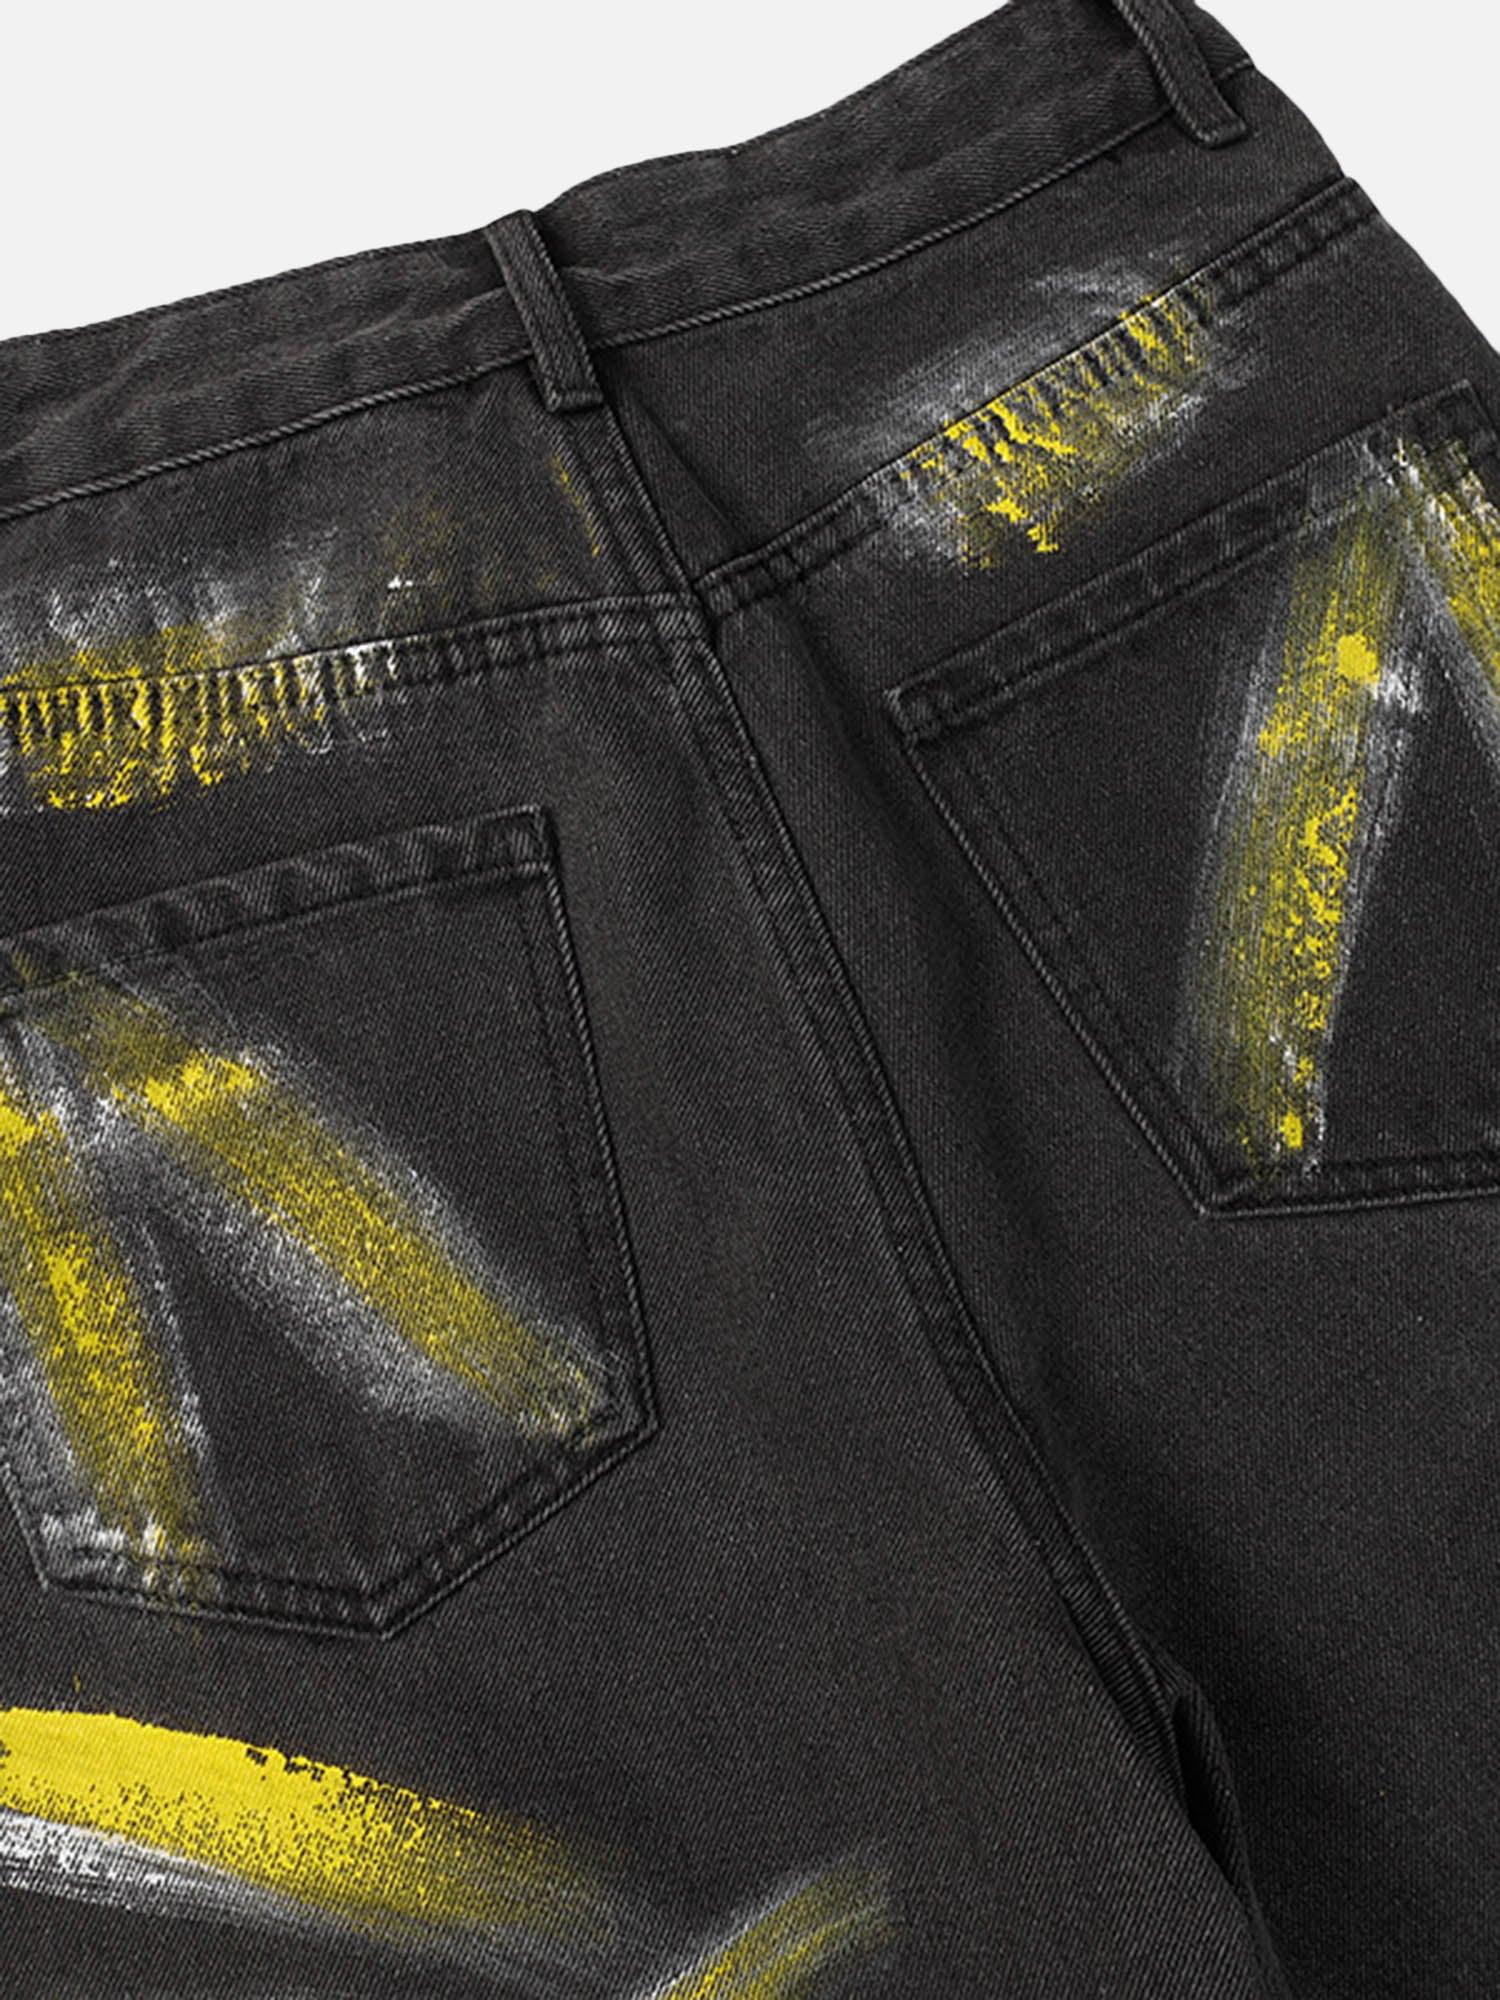 High Street Heavy Industry Graffiti Washed Jeans